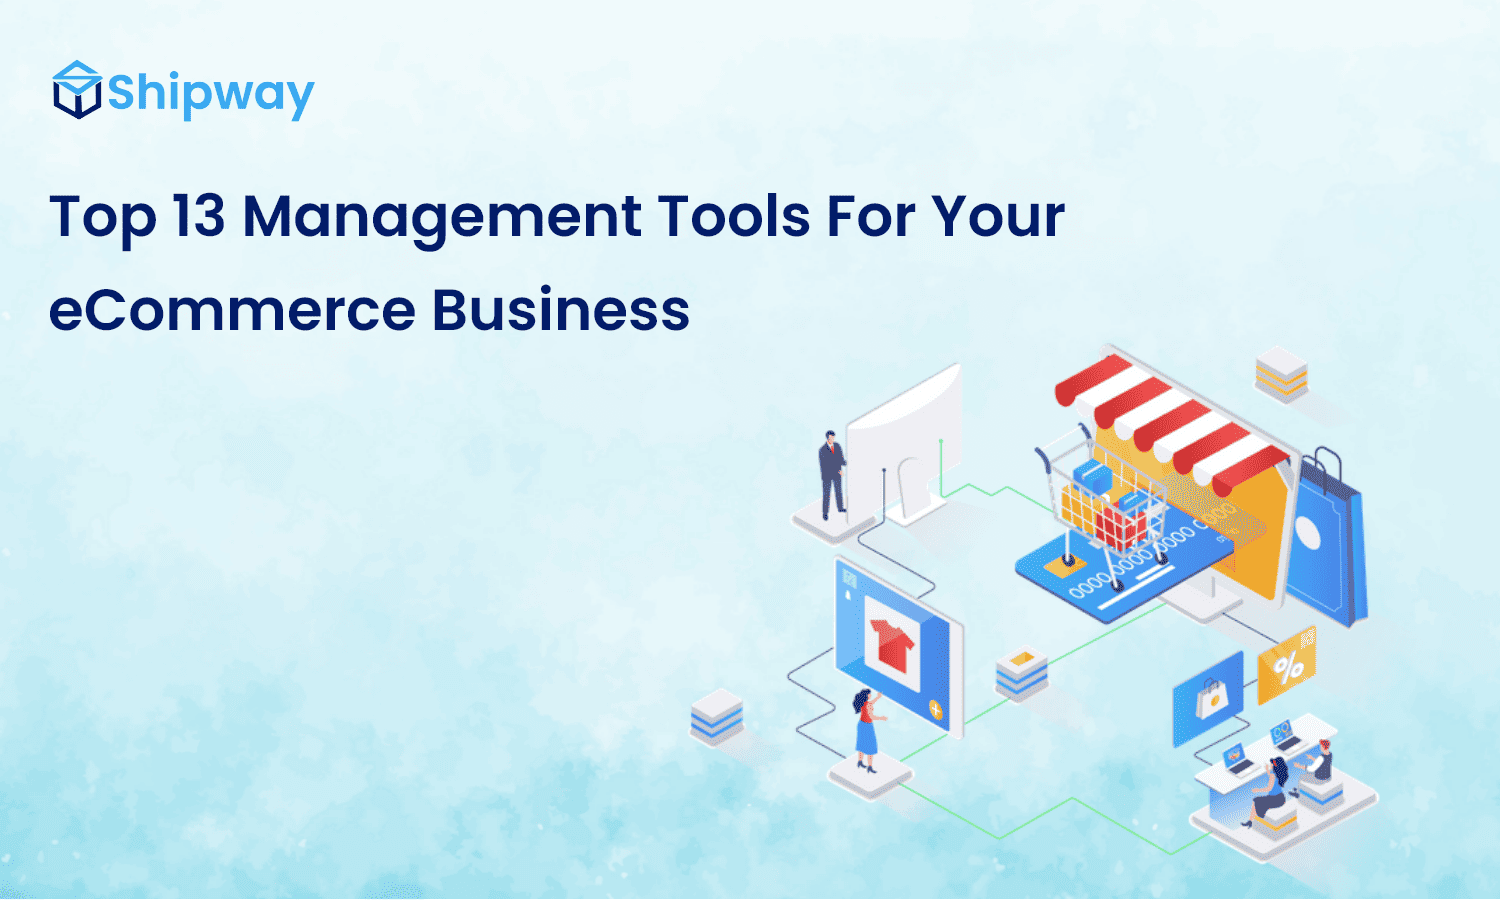 Top 13 Management Tools For Your eCommerce Business